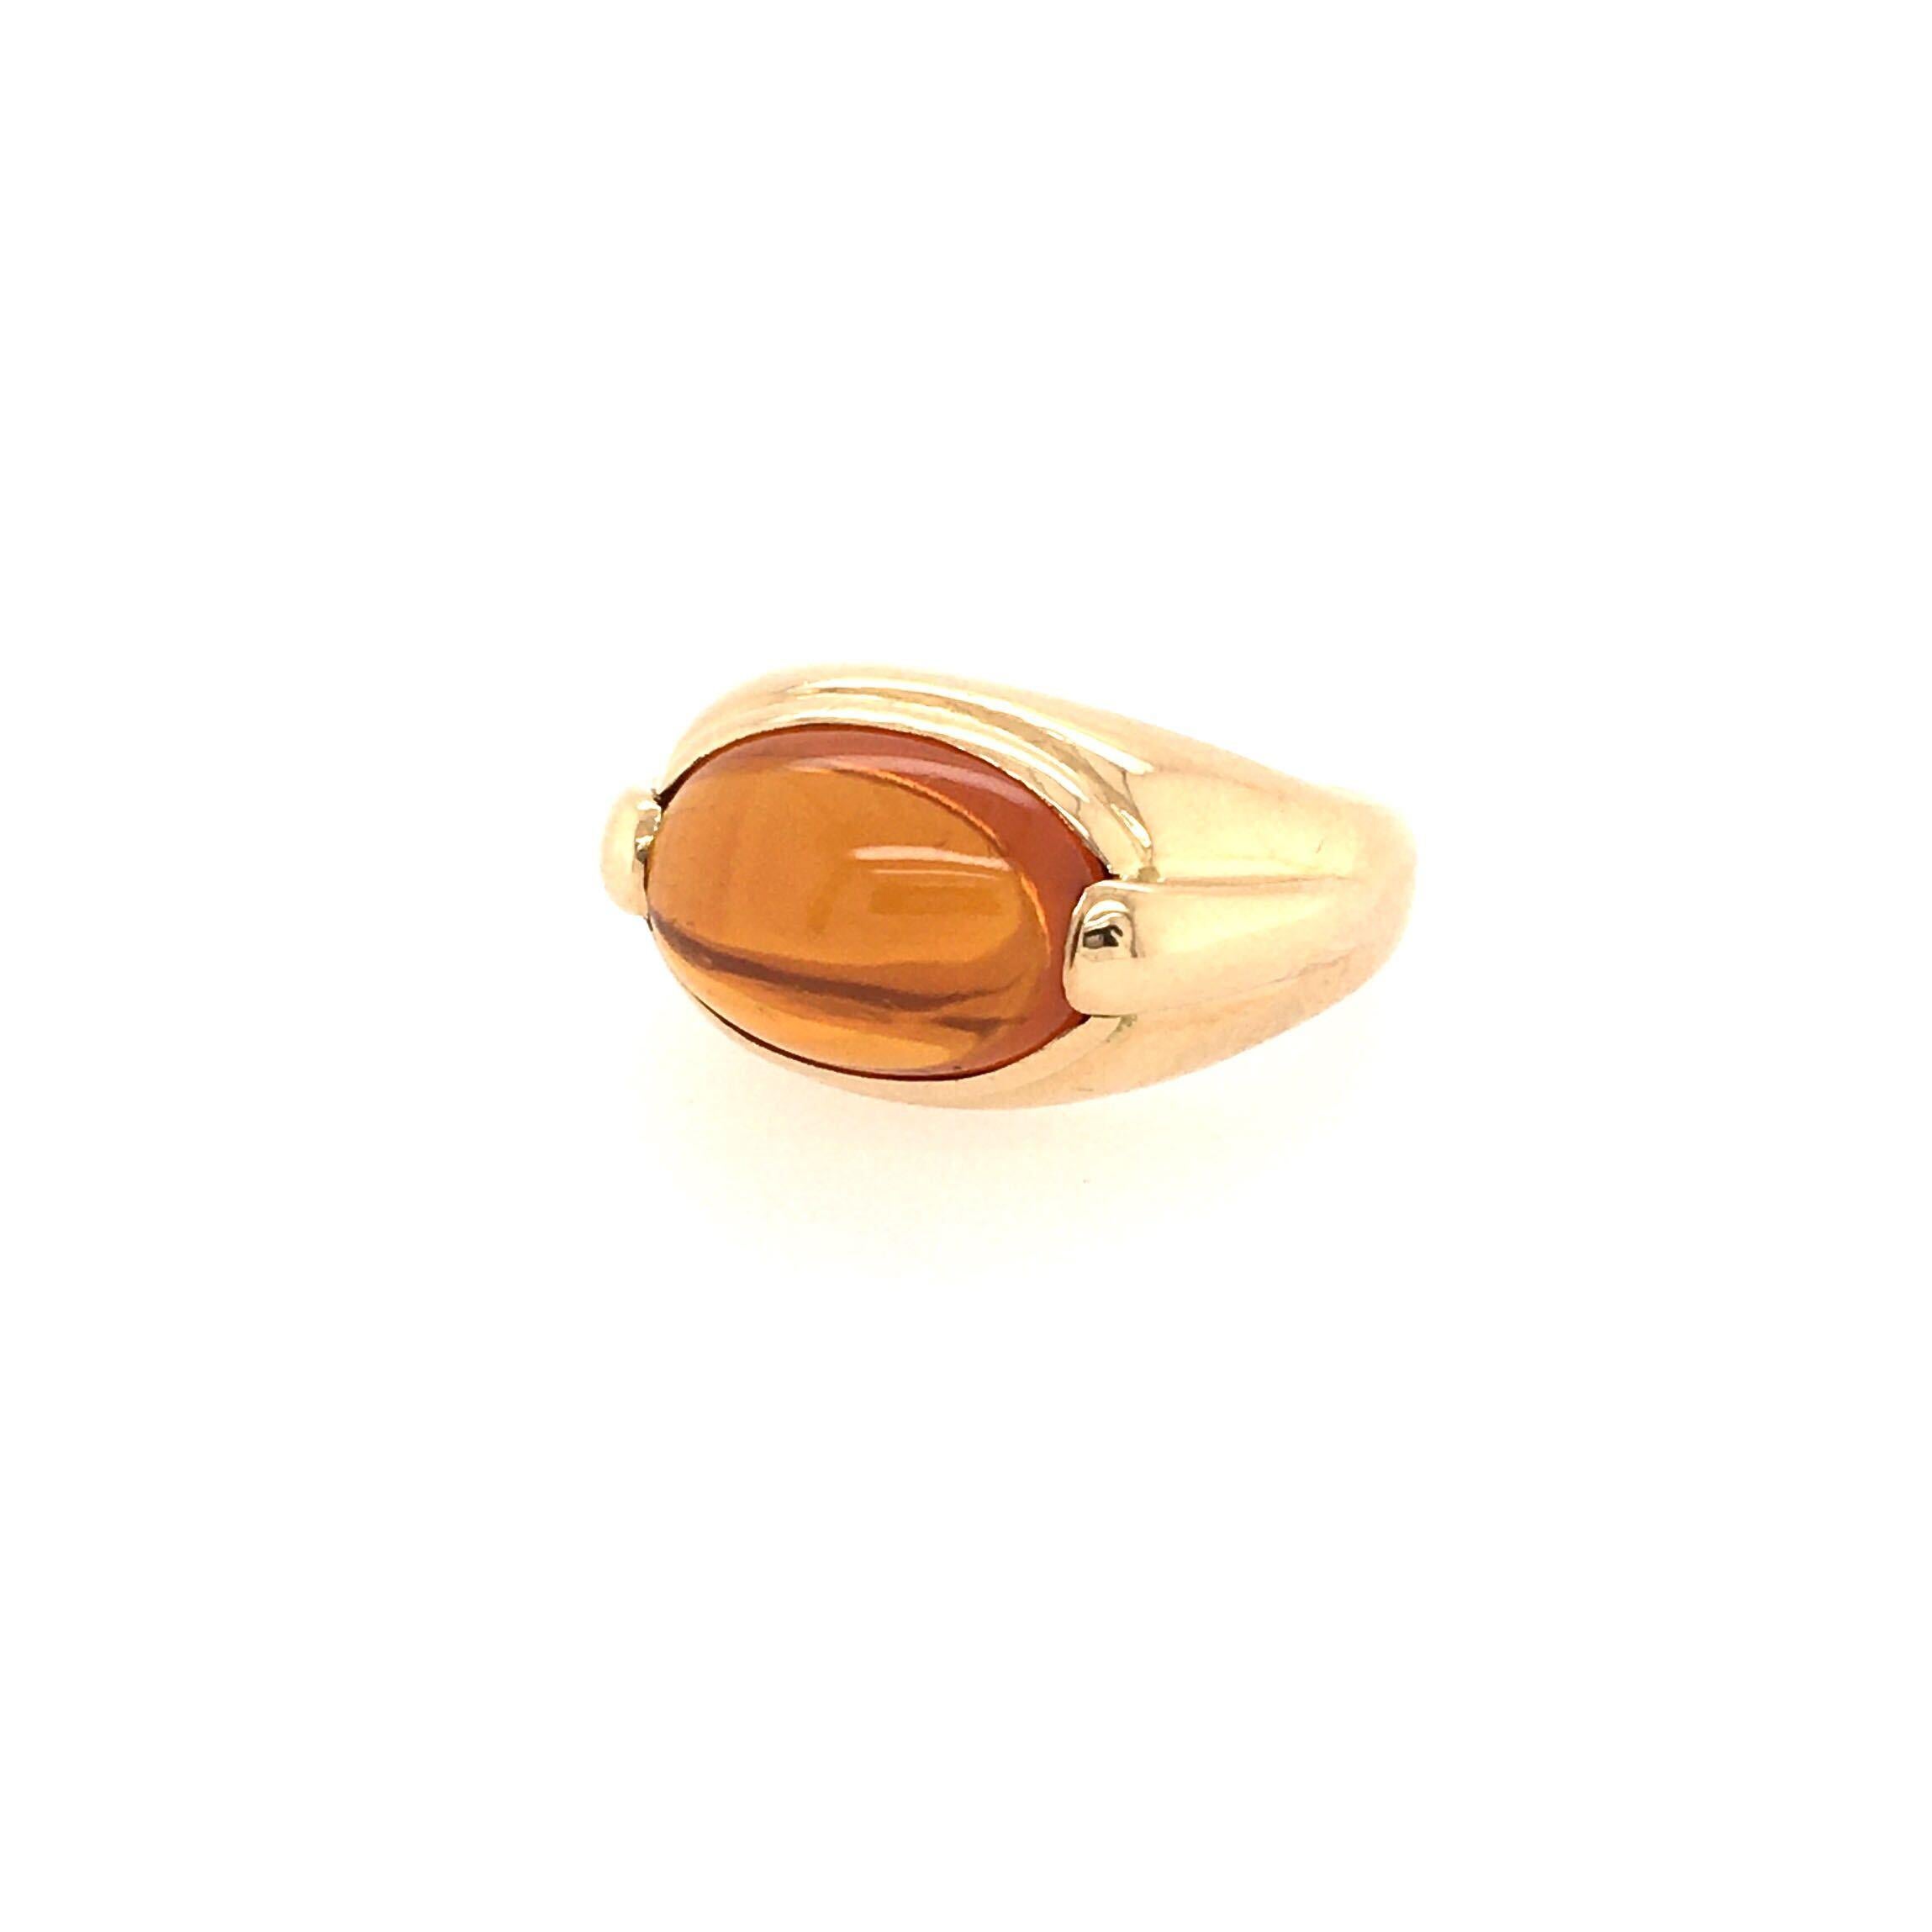 An 18 karat yellow gold and citrine ring. Bulgari. Circa 1990. Of polished tapered bombe design, centering a horizontally set cabochon citrine. Size 5 1/2, gross weight is approximately 11.6 grams. Stamped Bulgari. 